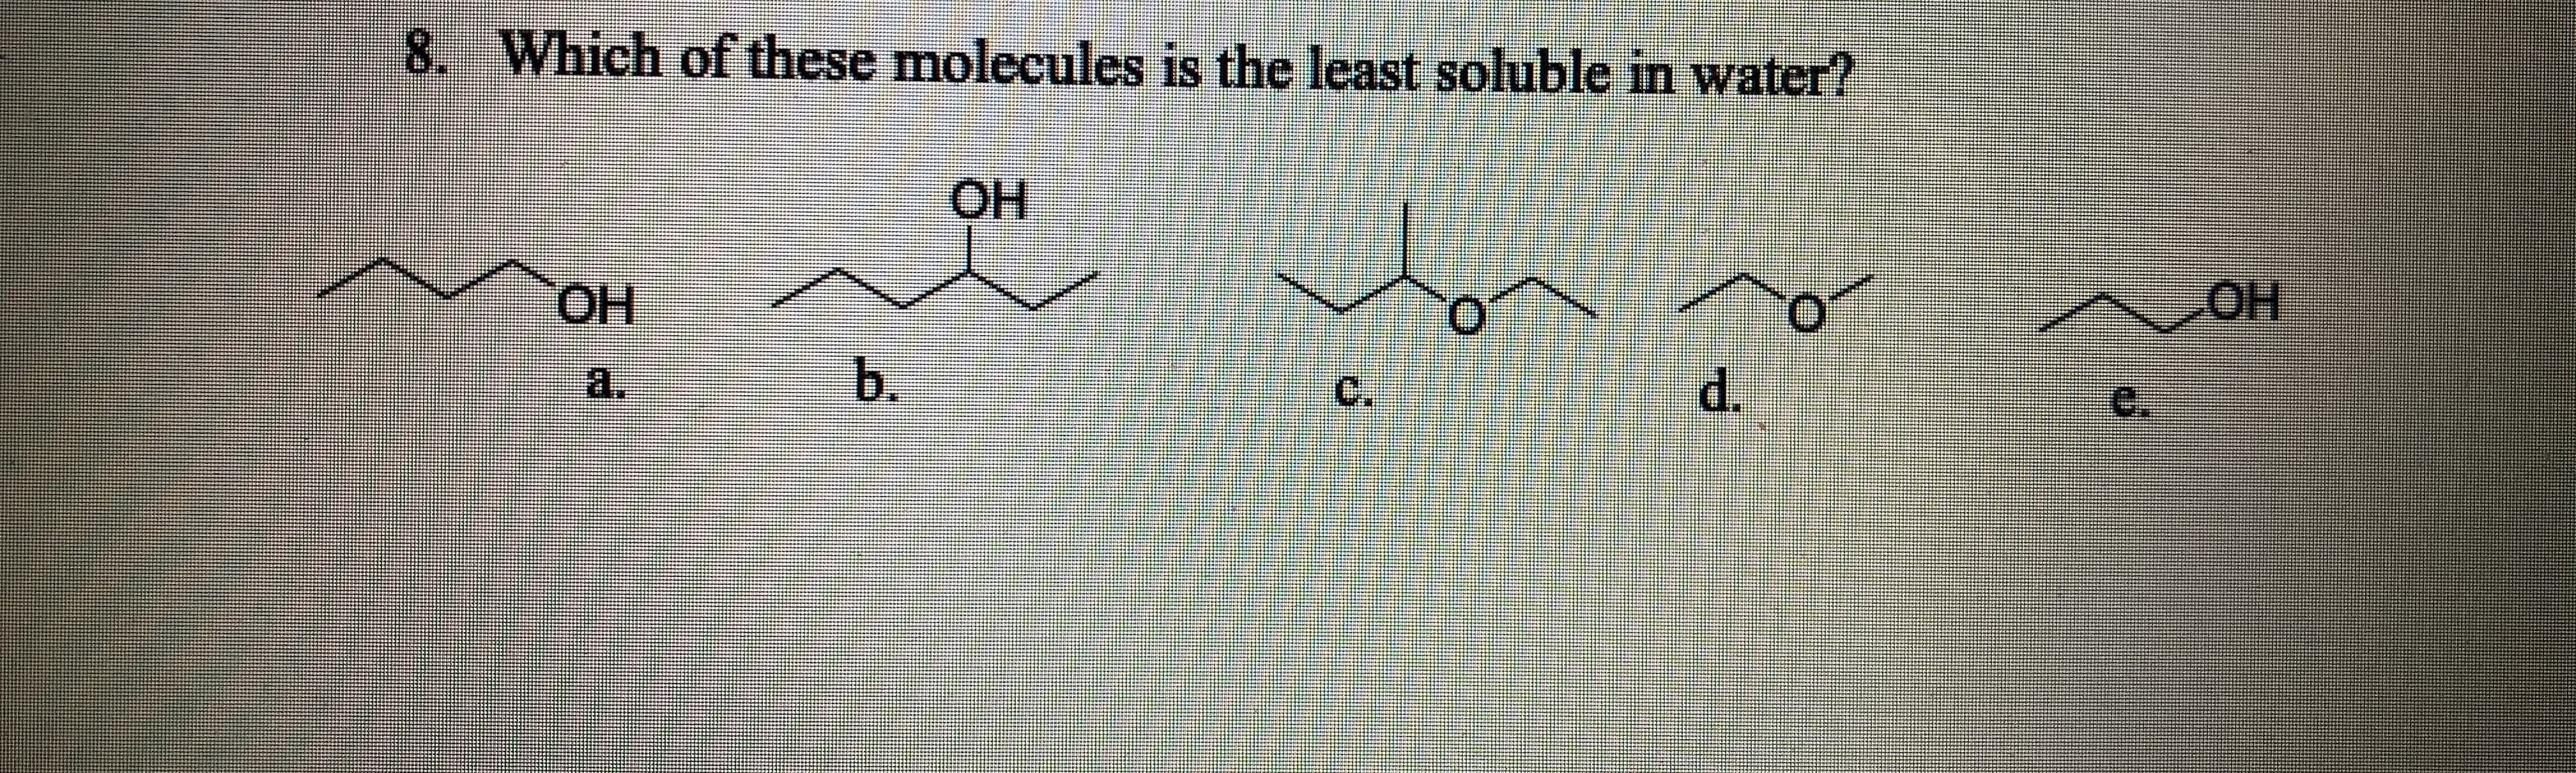 8. Which of these molecules is the least soluble in water?
он
Он
a.
b.
c.
d.
C.
